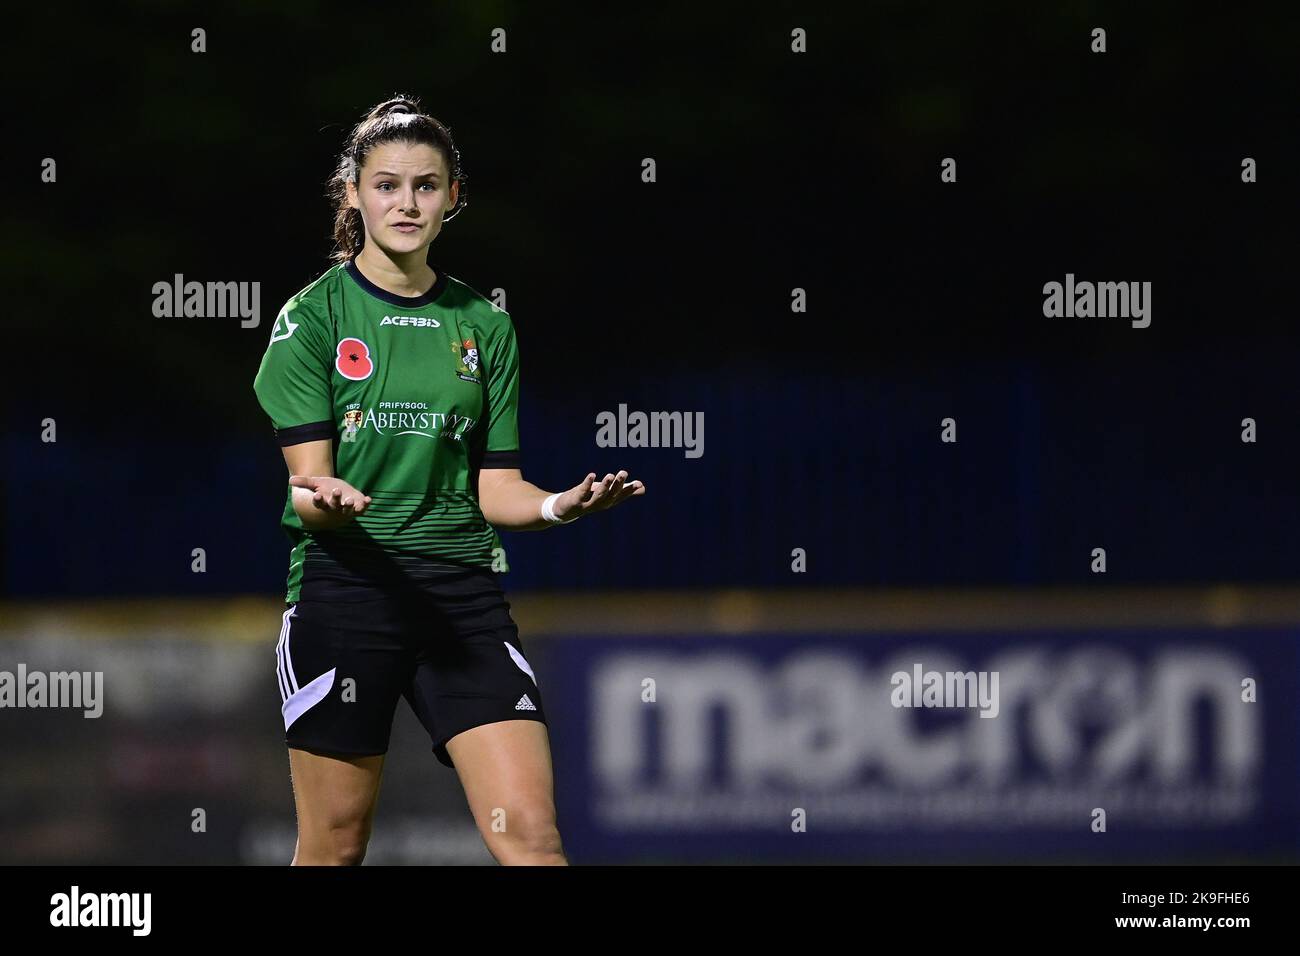 Barry, Wales. 27th Oct, 2022. Libby Isaac of Aberystwyth Town FC  - Mandatory by-line: Ashley Crowden  - 27/10/2022 - FOOTBALL - Jenner Park Stadium - Barry, Wales - Barry Town United Women vs Aberystwyth Town Women’s FC - Genero Adran Premier Phase 1 22/23 Credit: Ashley Crowden/Alamy Live News Stock Photo